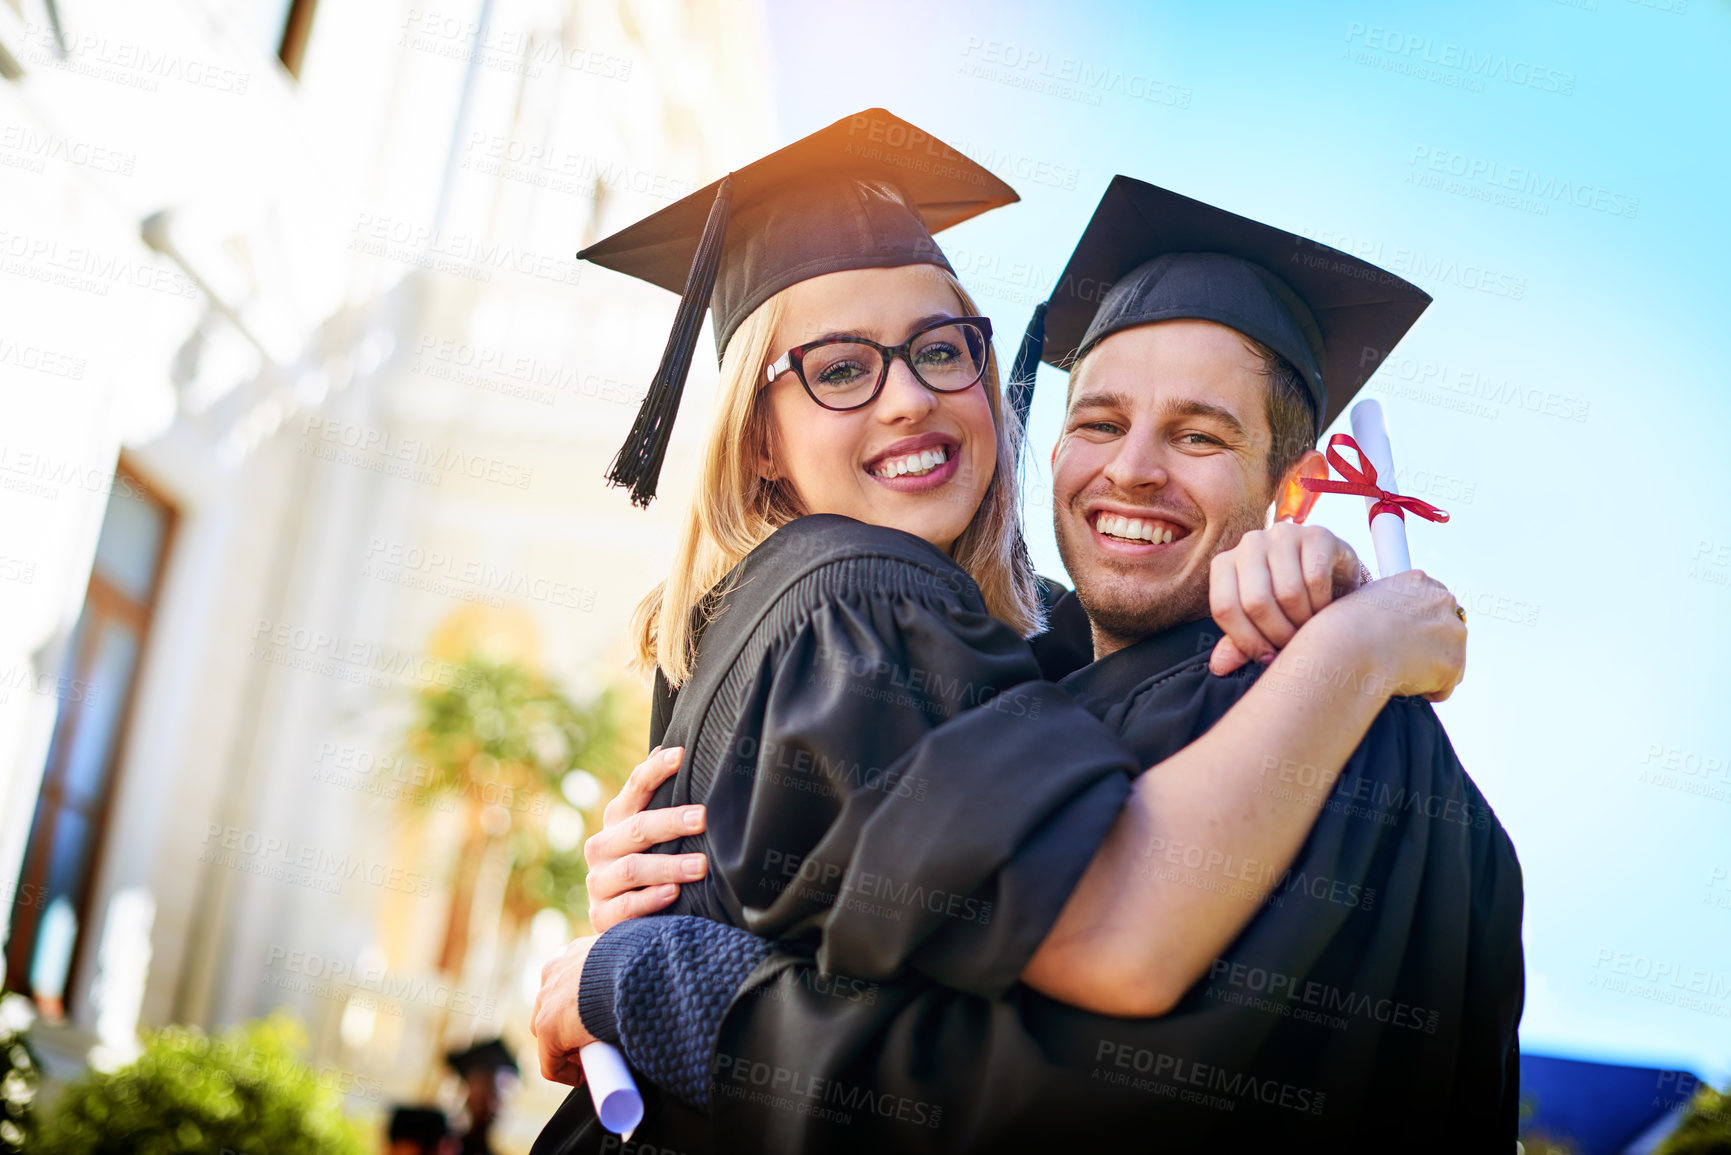 Buy stock photo Shot of a young couple embracing each other on graduation day